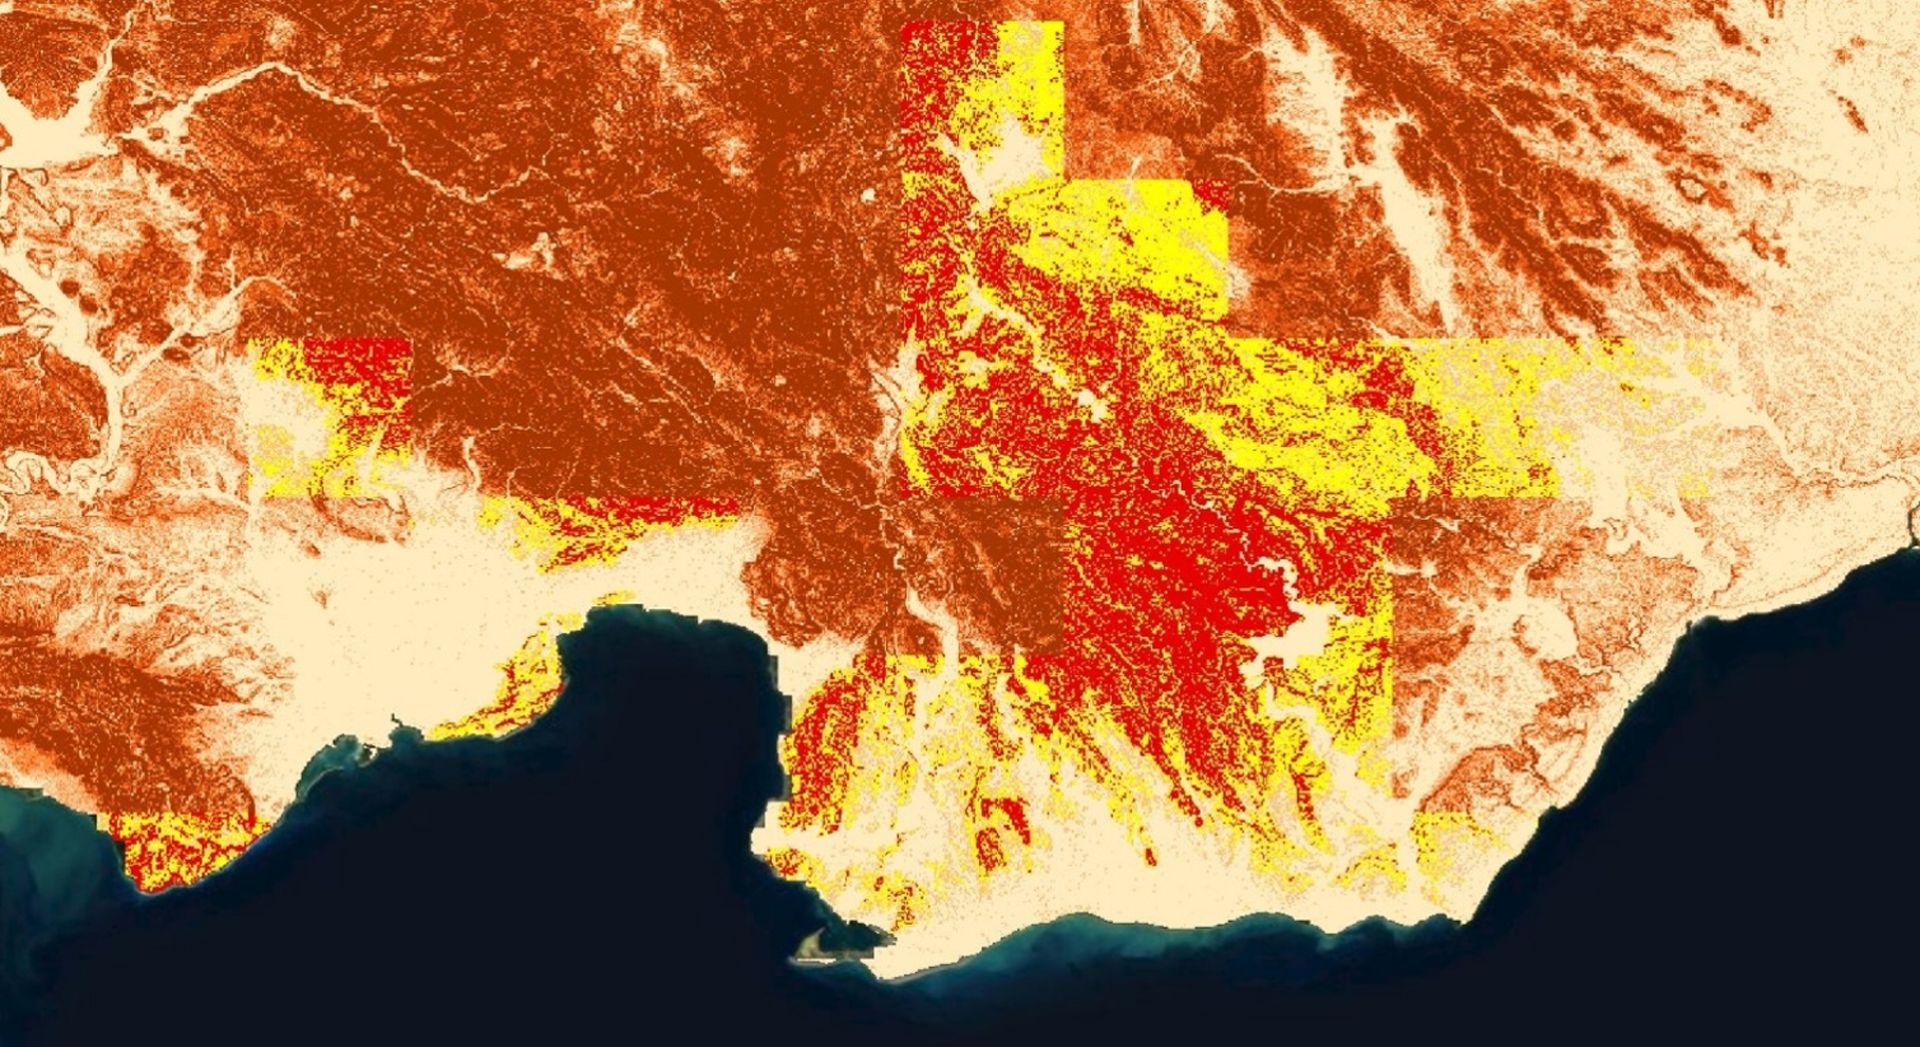 Average GPM IMERG data (2018) combined with landslide susceptibility calculated using SRTM imagery (2000) serve as inputs for the Landslide Hazard Assessment for Situational Awareness (LHASA) model for the Dominican Republic Cordillera Central mountain range. This LHASA “nowcast” respectively shows high and moderate landslide potential in red and yellow, as well as high to low susceptibility to rainfall-triggered landslides in dark and light orange. With LHASA nowcasts, landslide hazard can be assessed in near real-time.